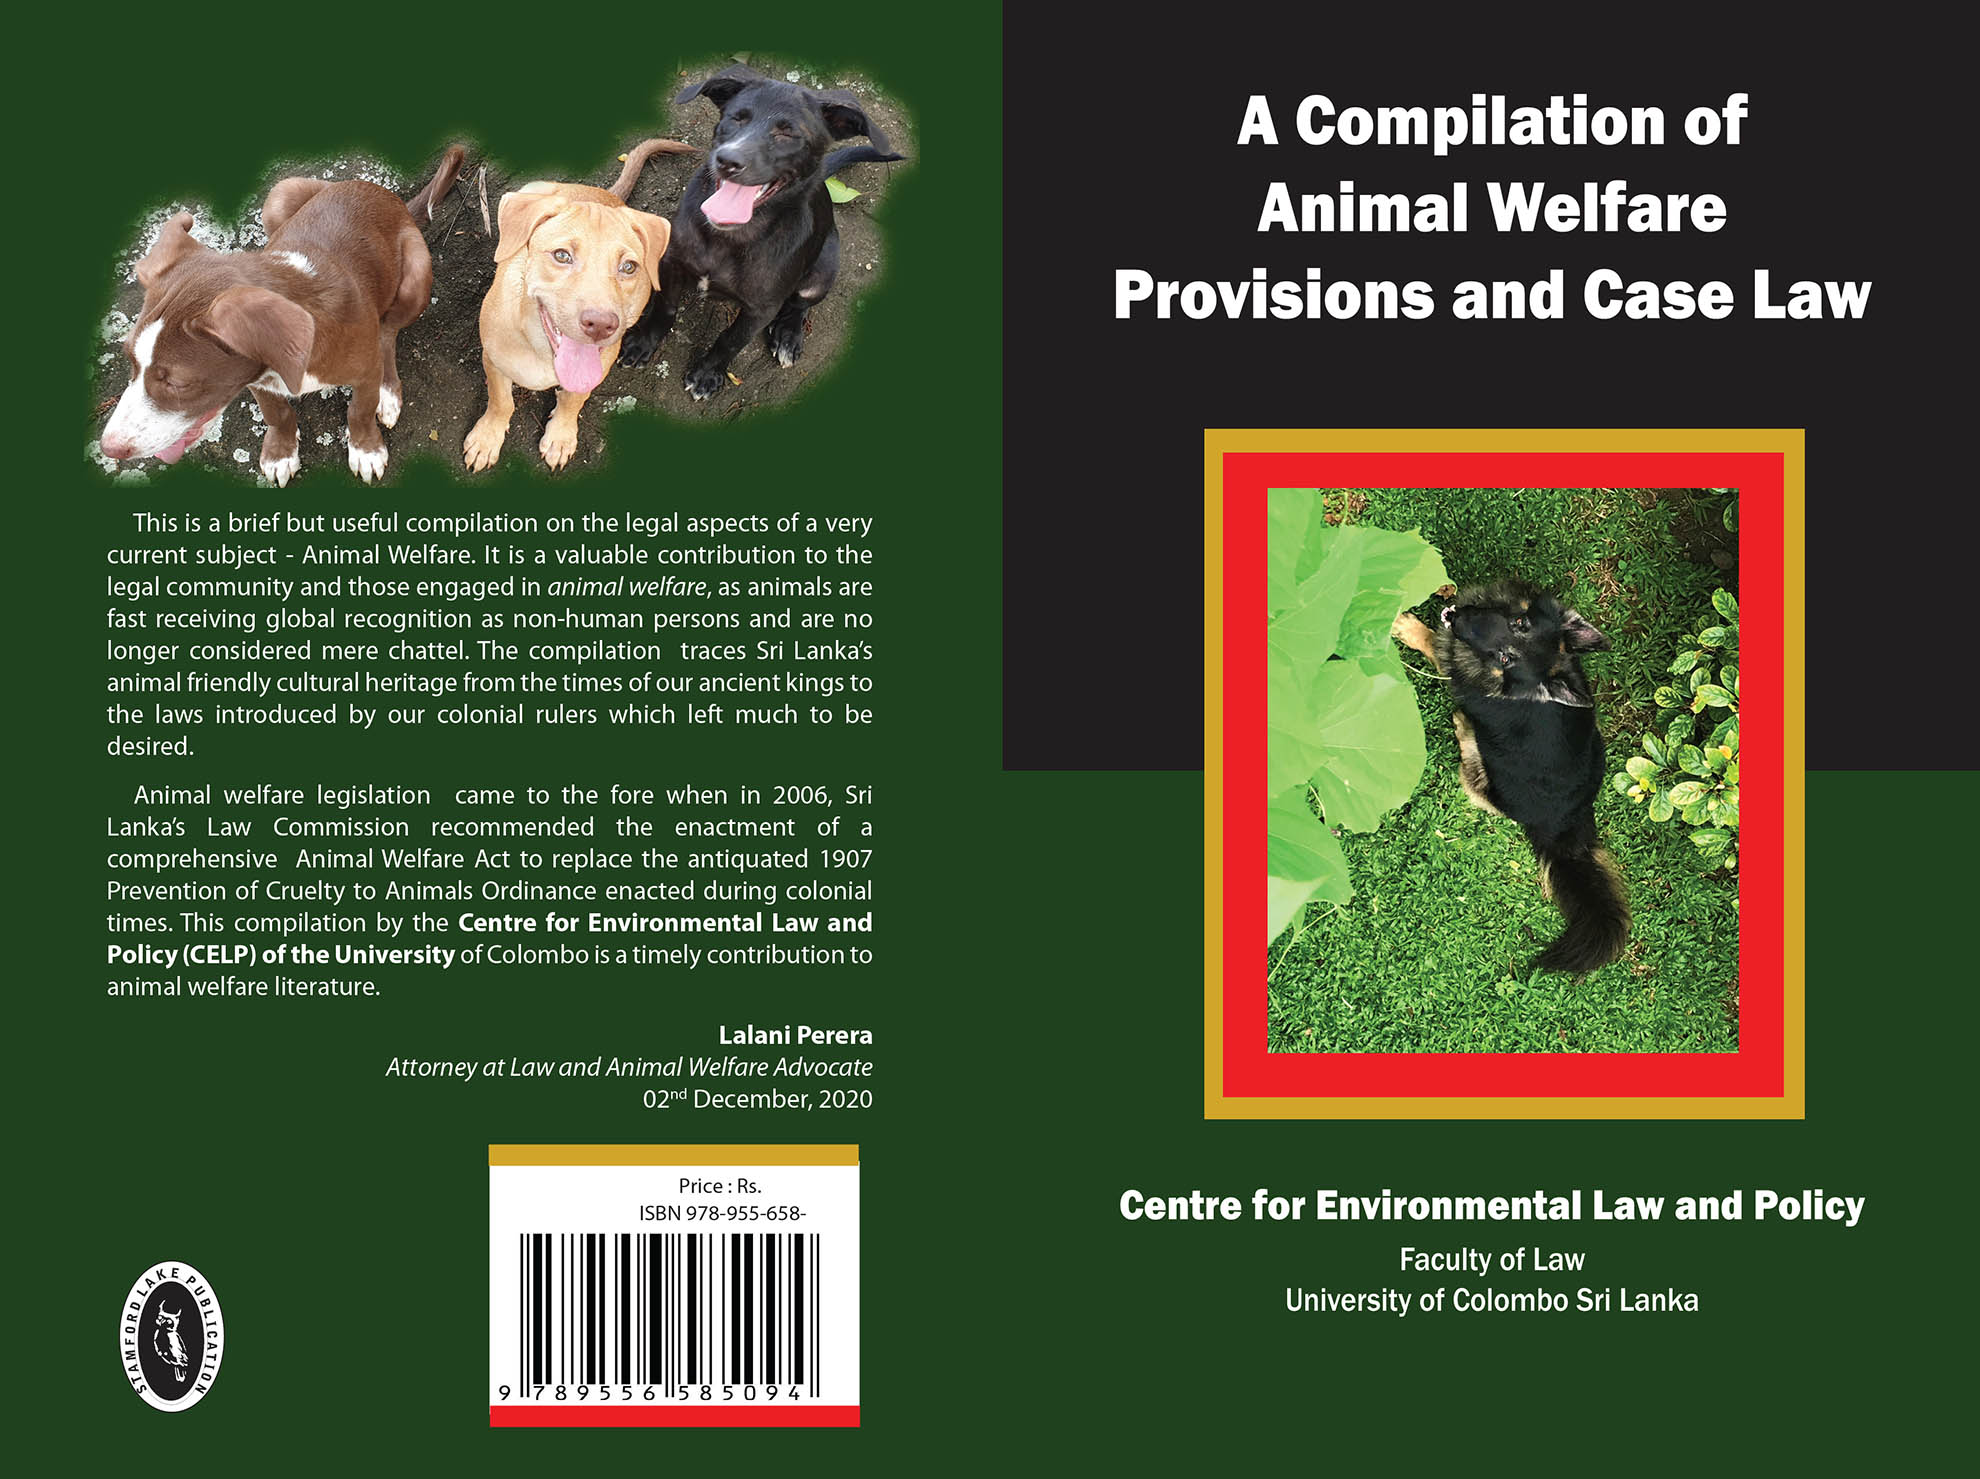 Compilation of Animal Welfare: Provisions and Case Law, Vol. 1